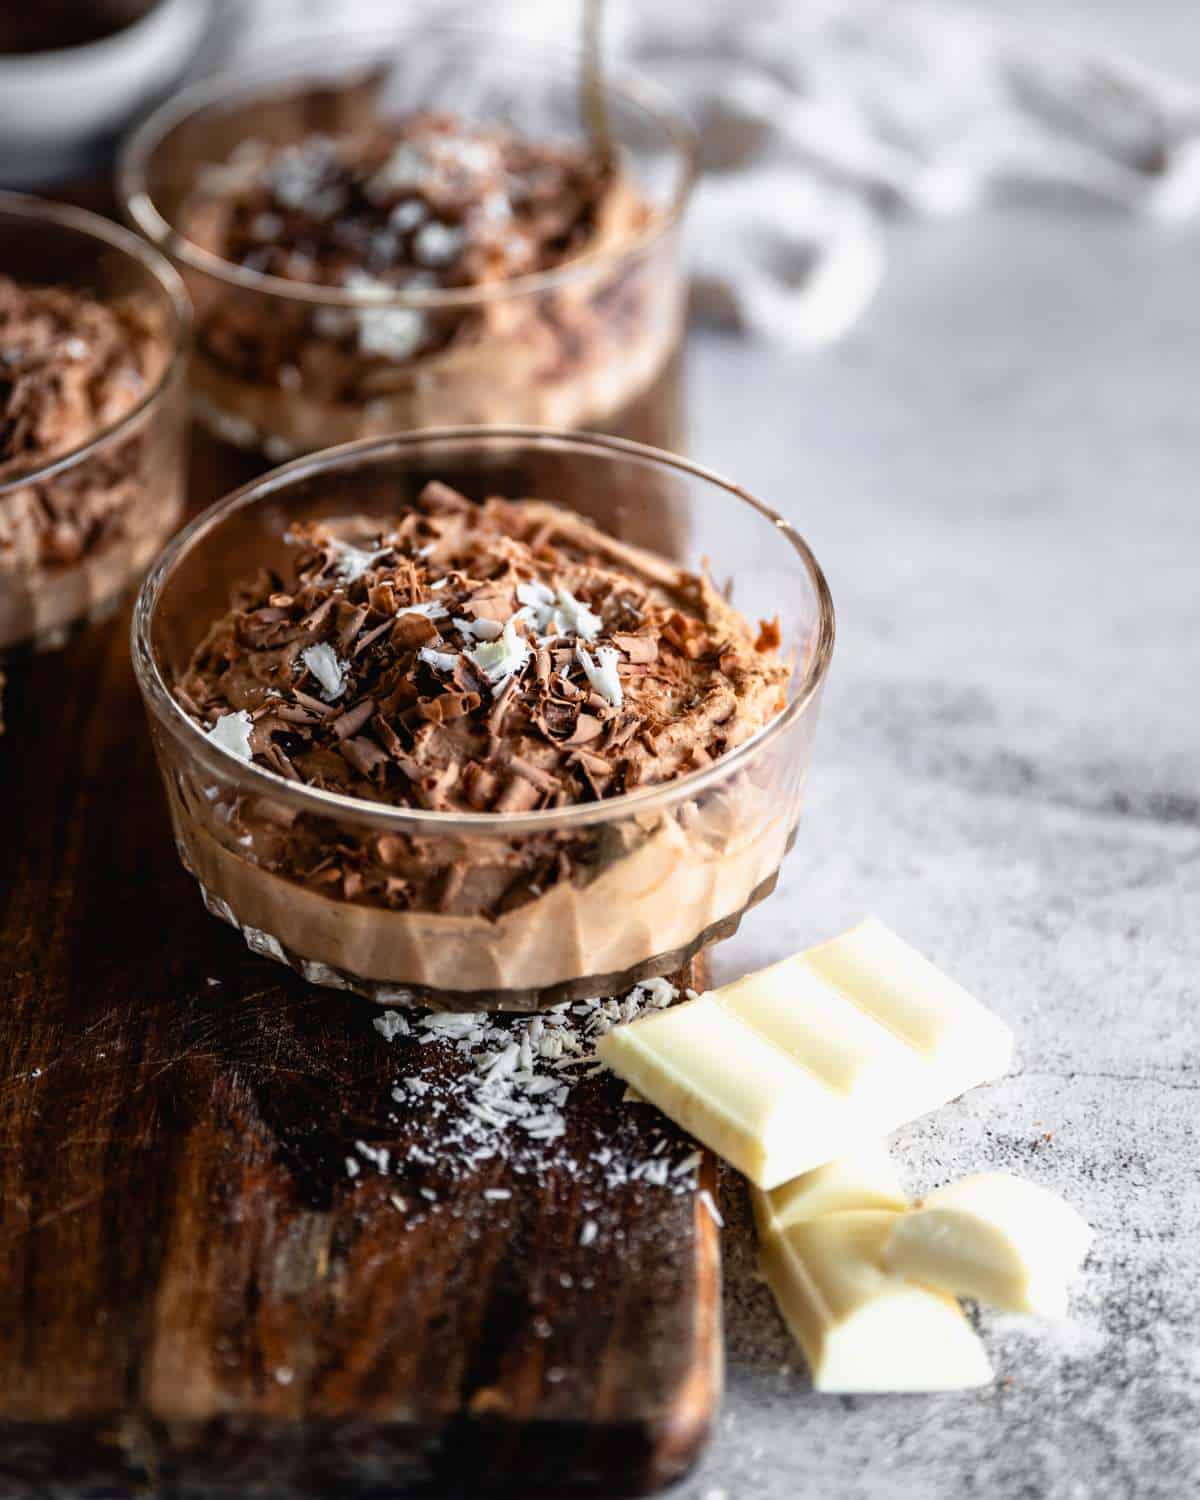 A close up of one serving of chocolate mousse with shredded coconut and chocolate on top with some pieces of white chocolate to the side on a wooden chopping board